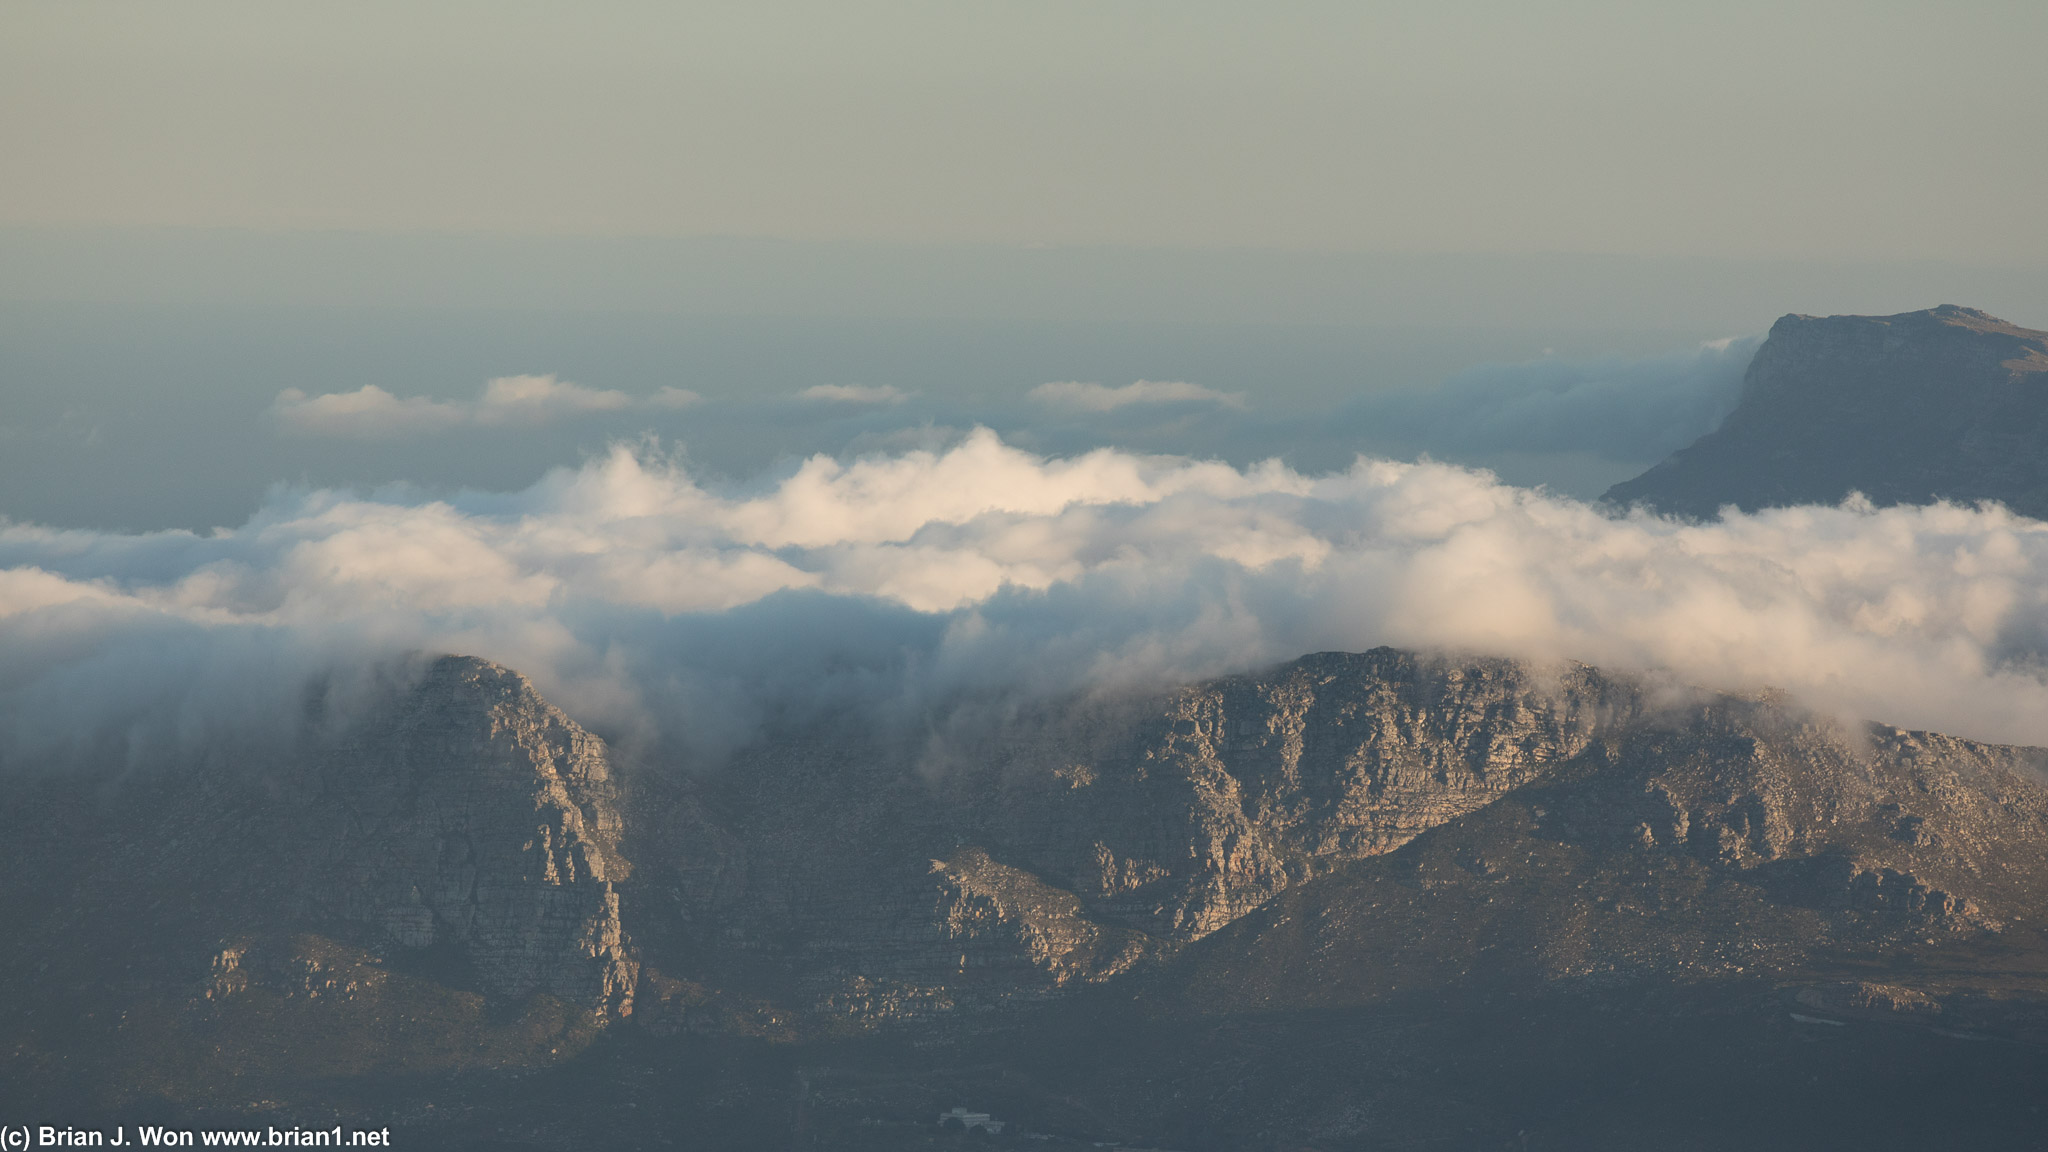 Clouds covering the mountains to the west.